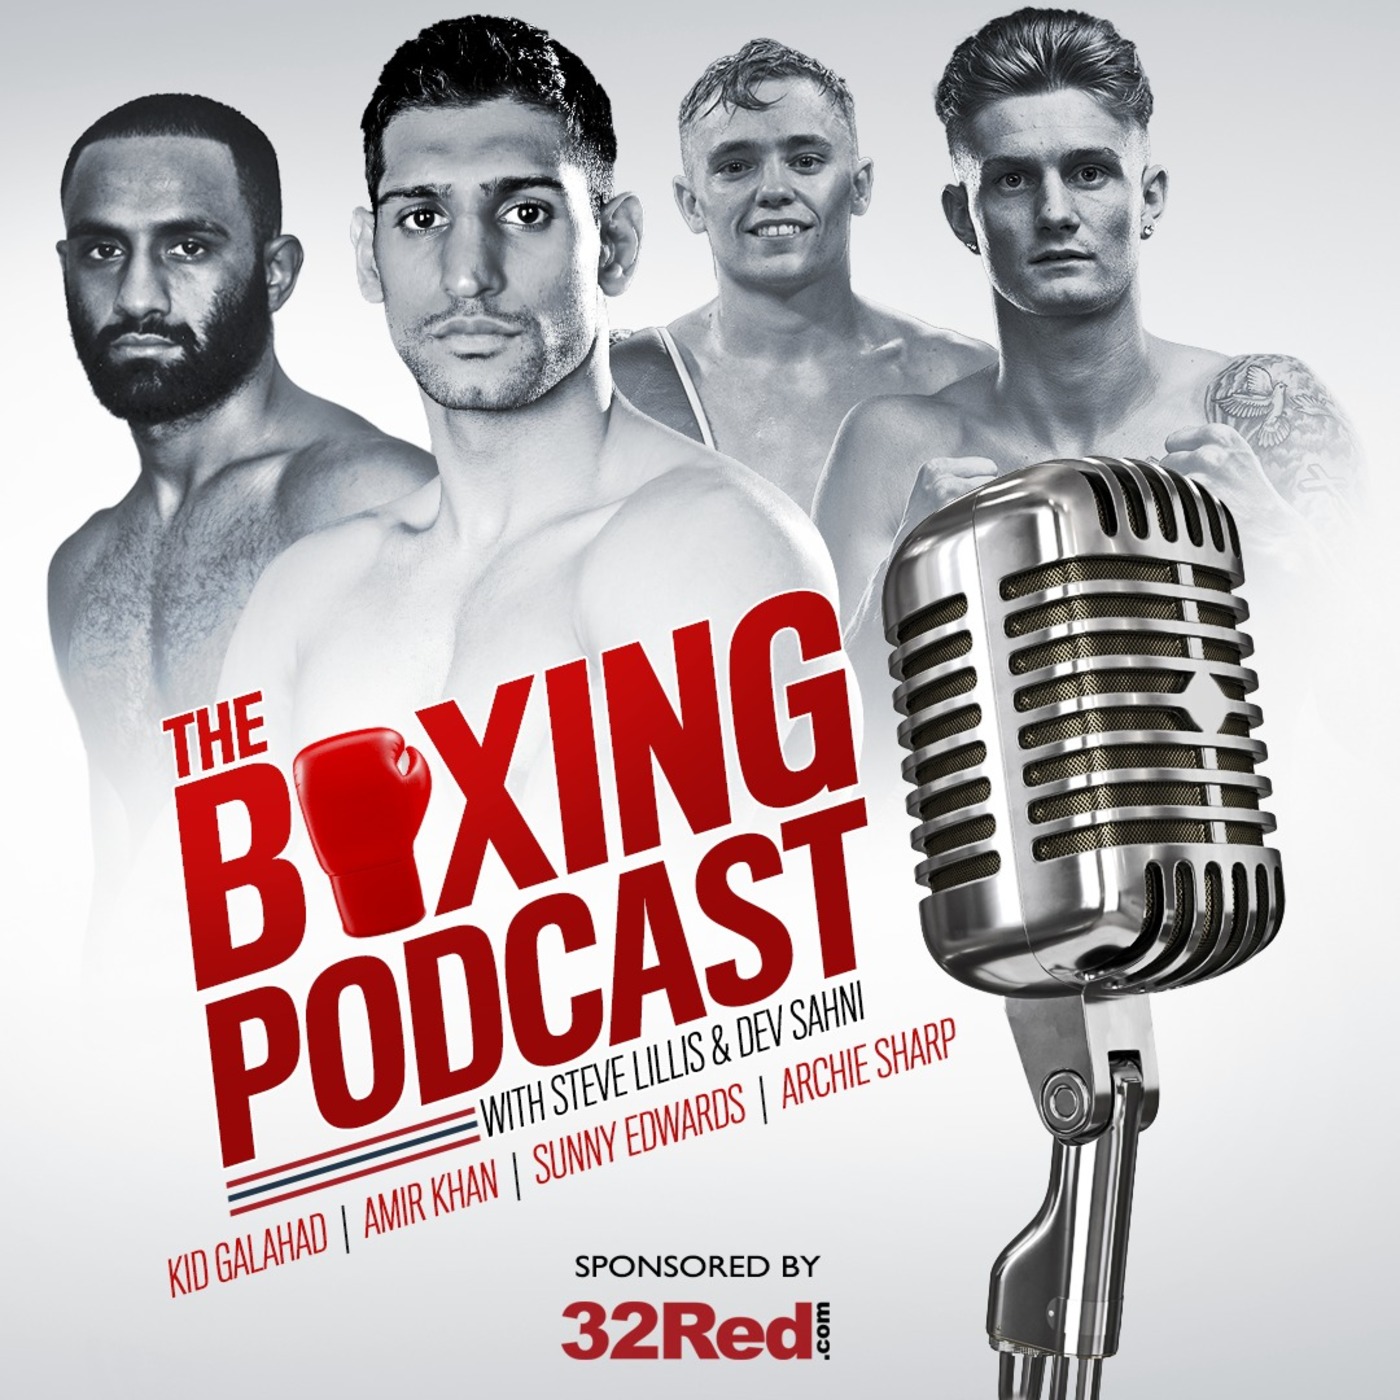 The Boxing Podcast | Episode 14 - Amir Khan on Terence Crawford fight! Kid Galahad, Sunny Edwards and Archie Sharp!